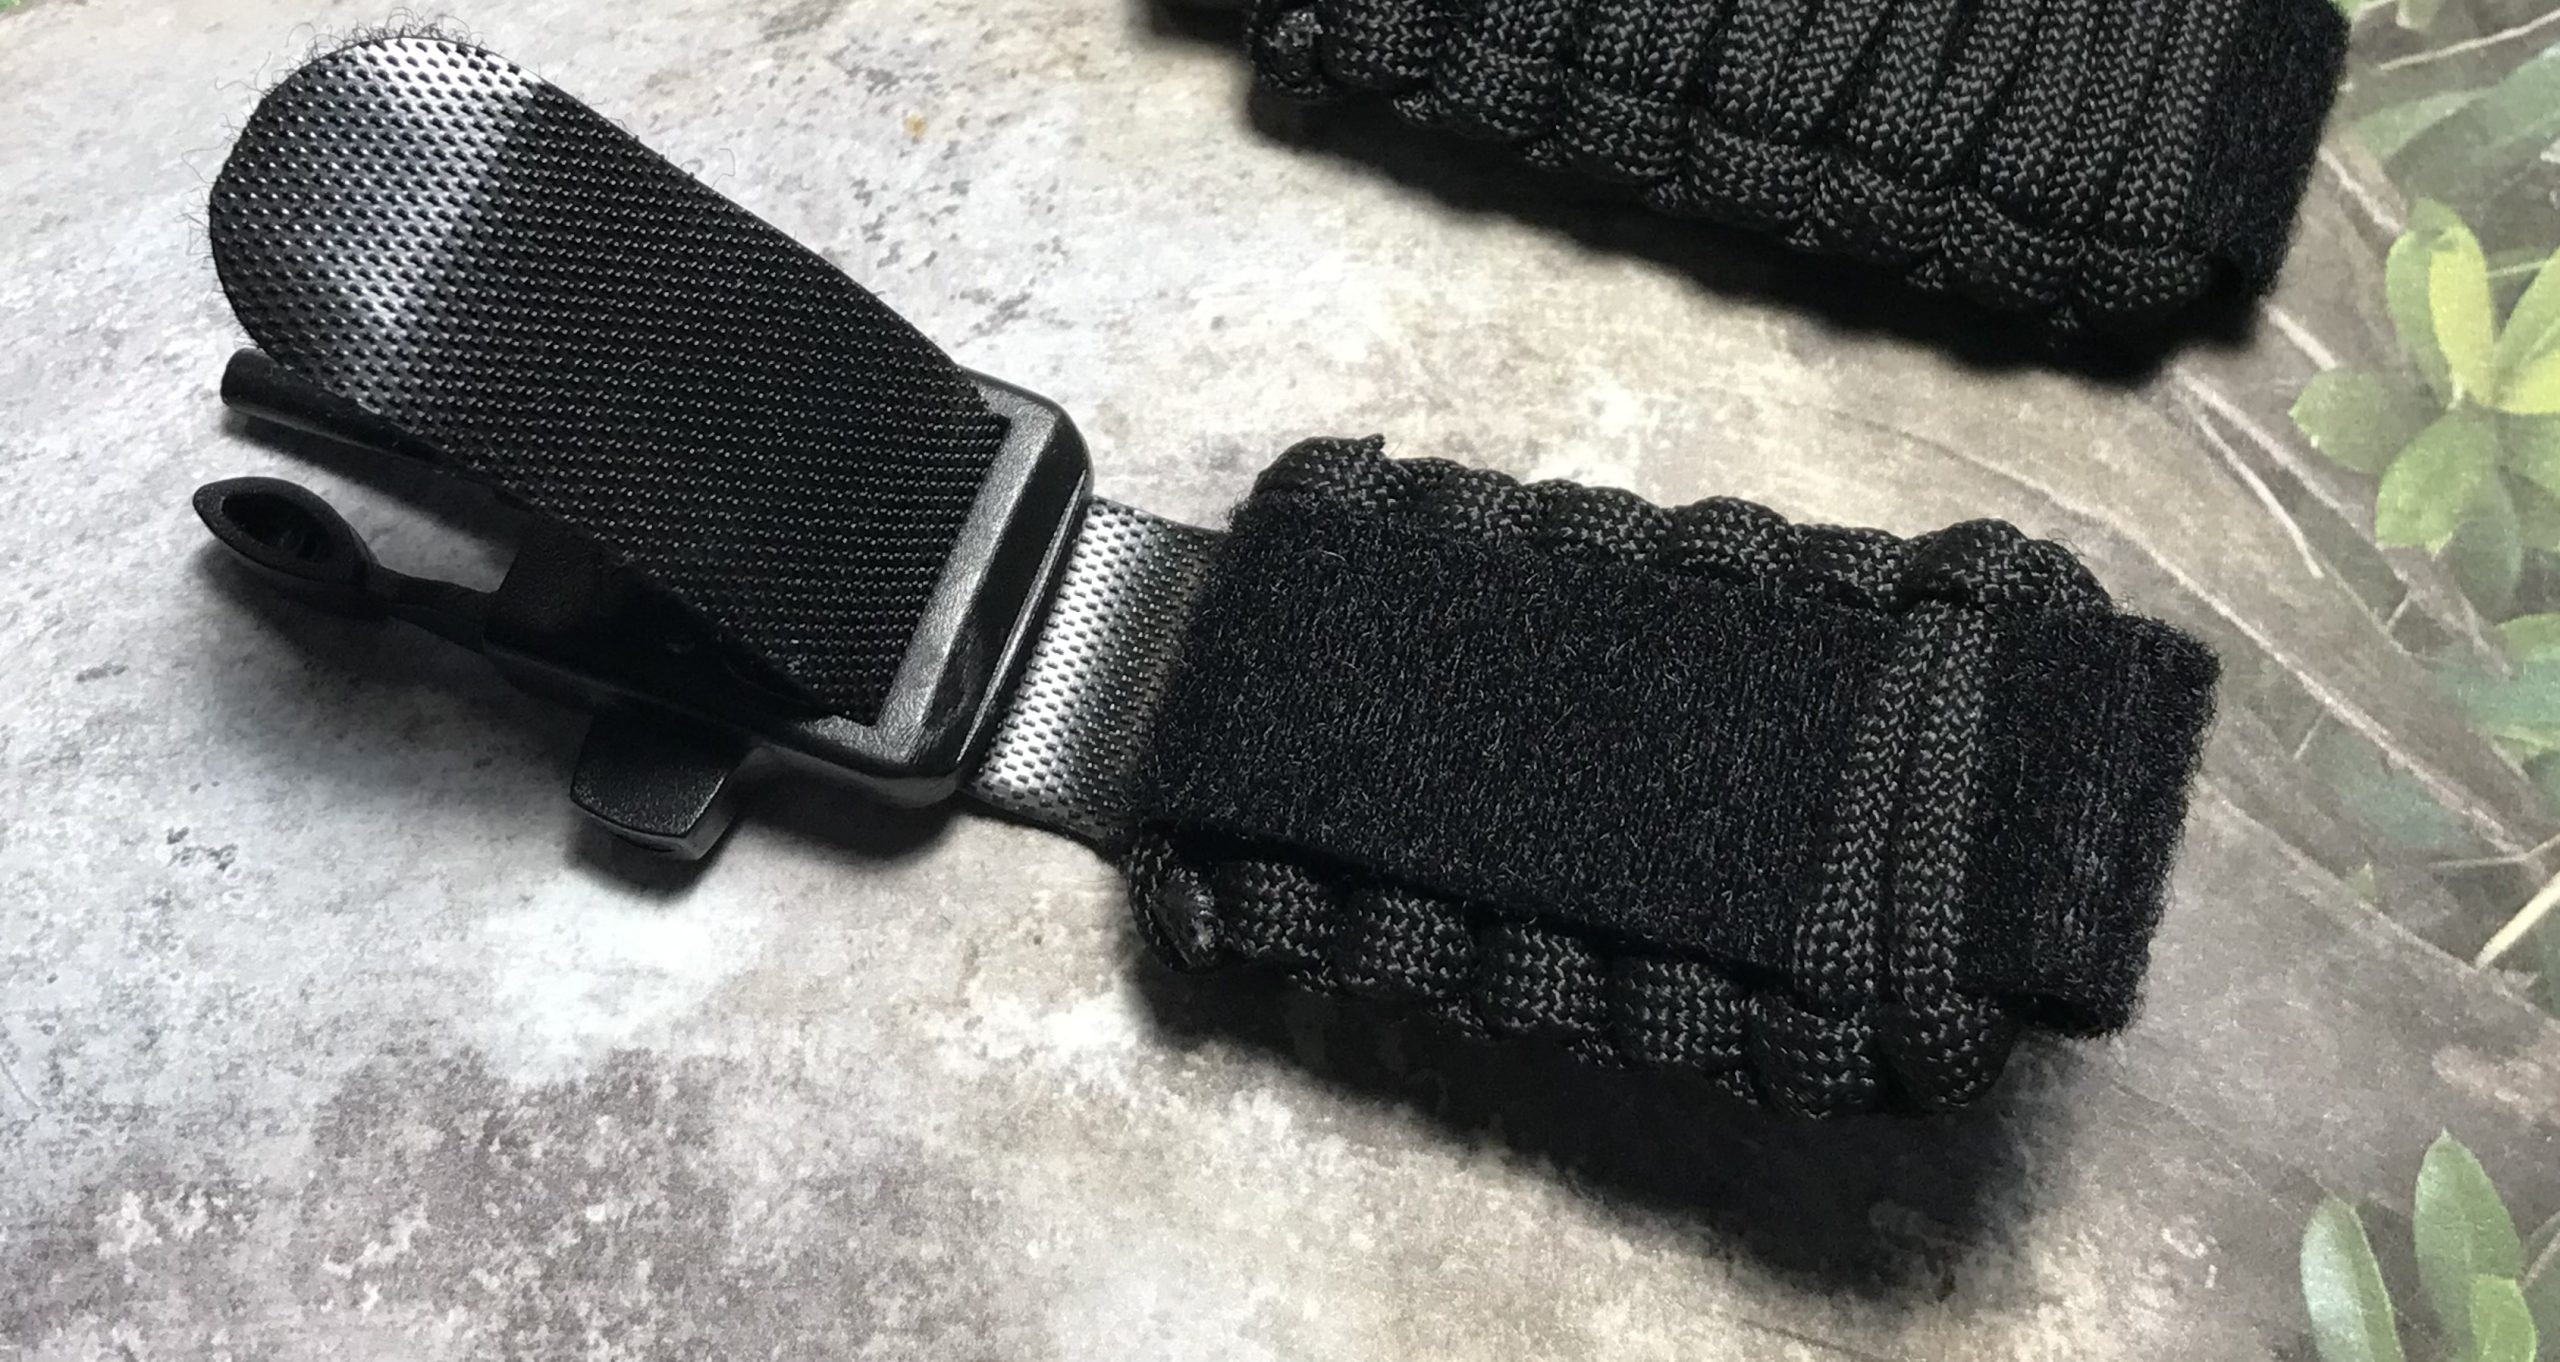 Band expands 1 extra inch for comfort